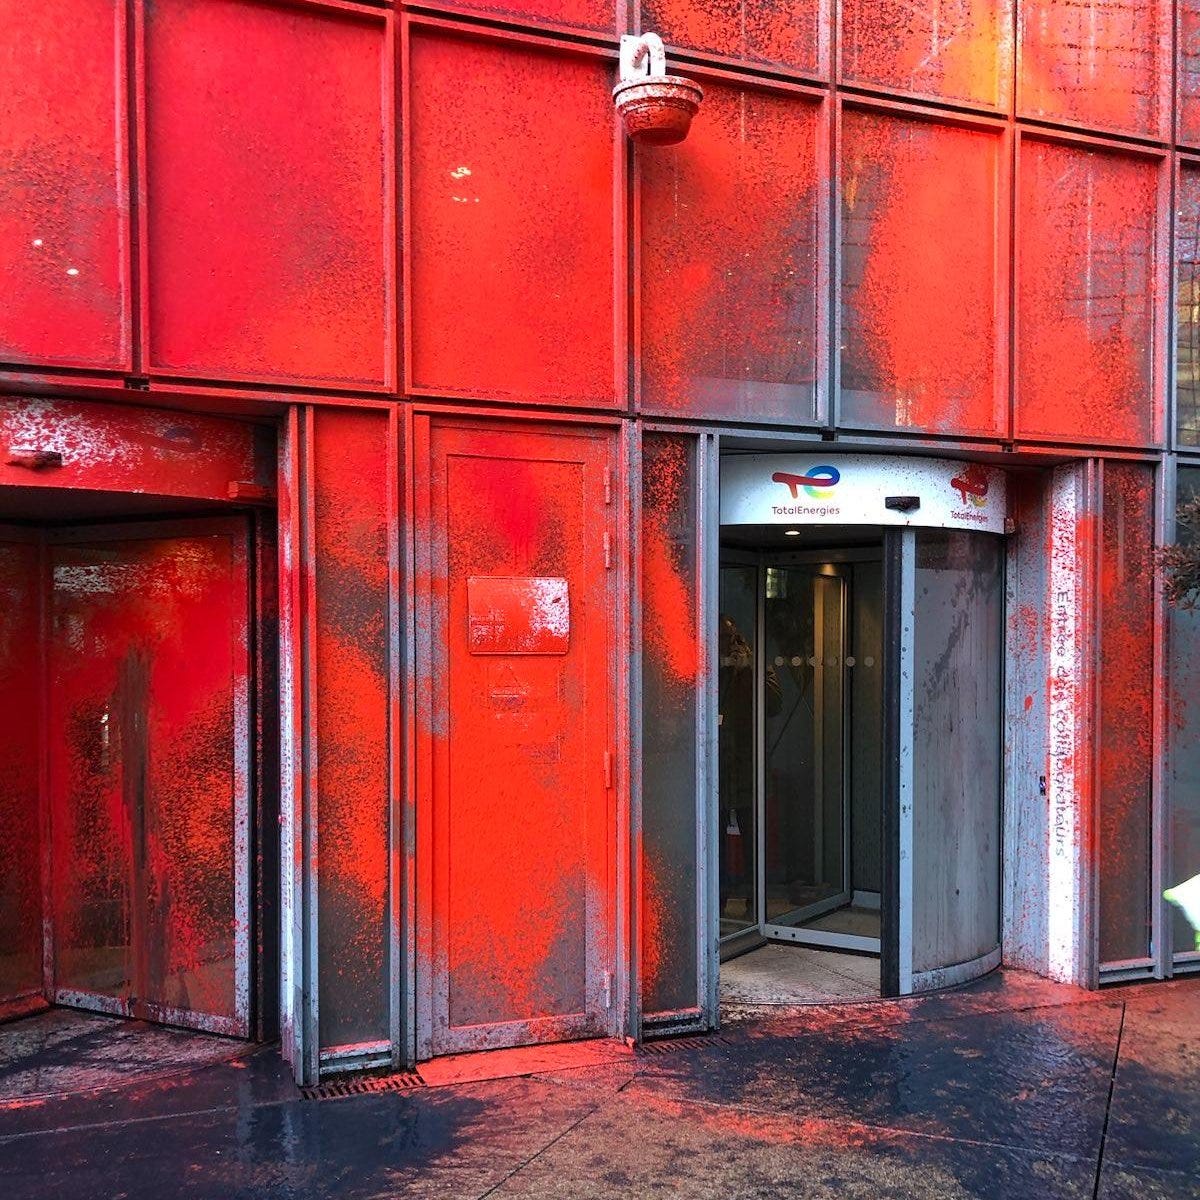 TotalEnergies HQ covered in red paint